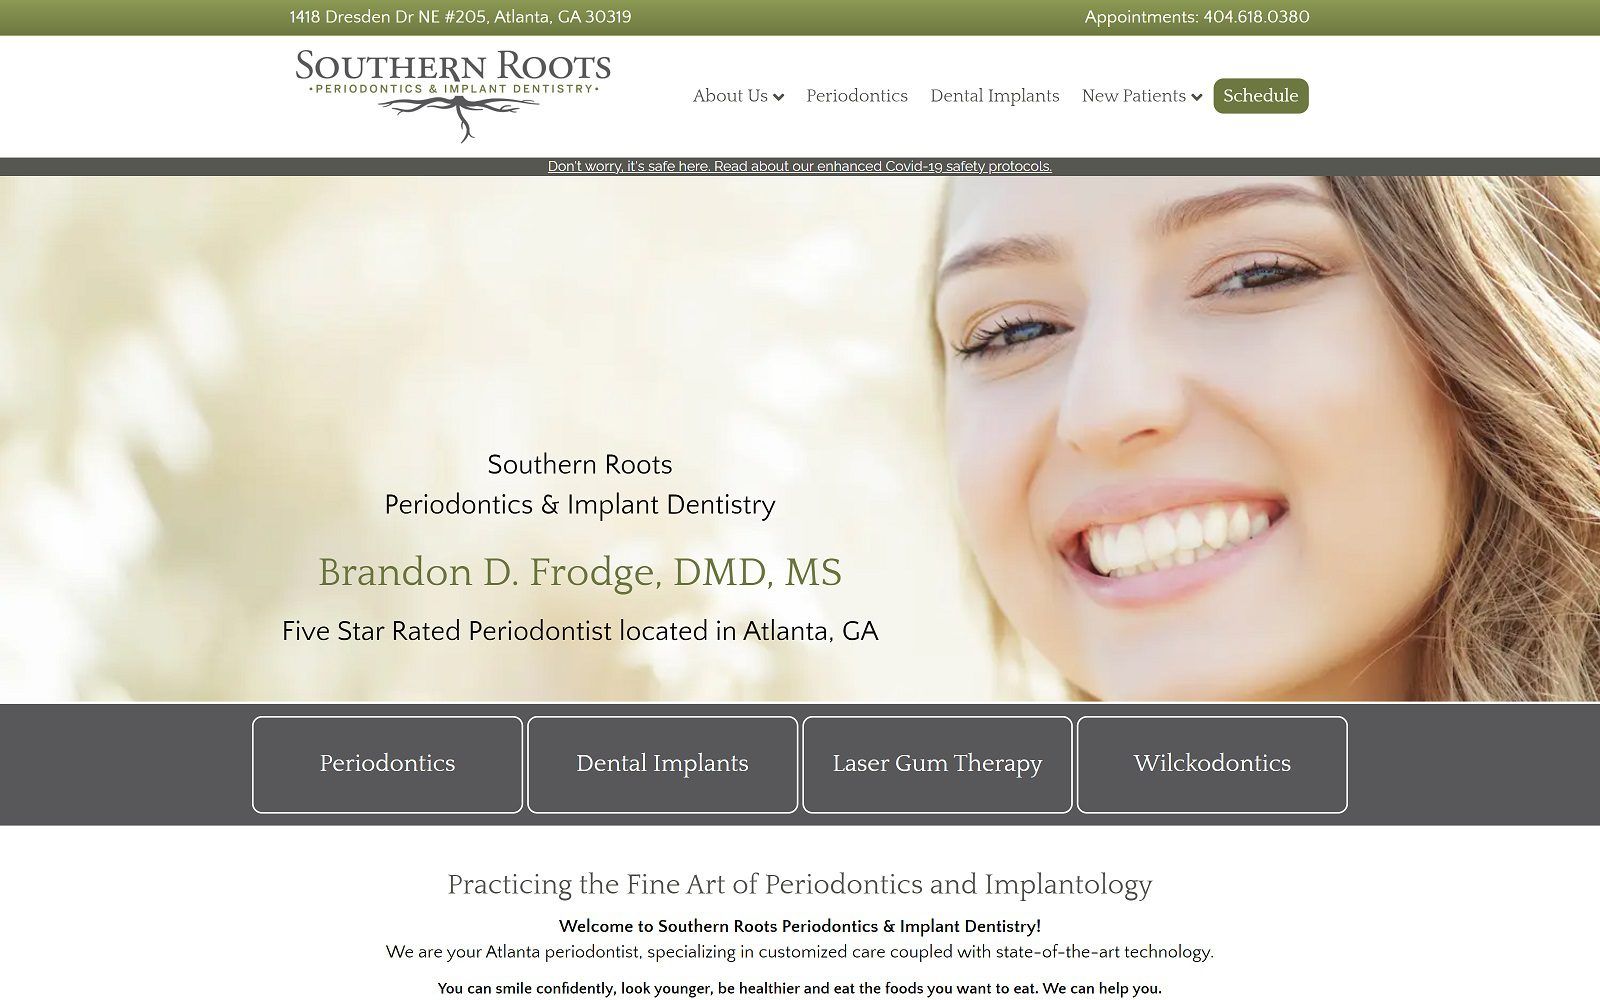 The screenshot of southern roots periodontics: brandon d. Frodge, dmd, ms website